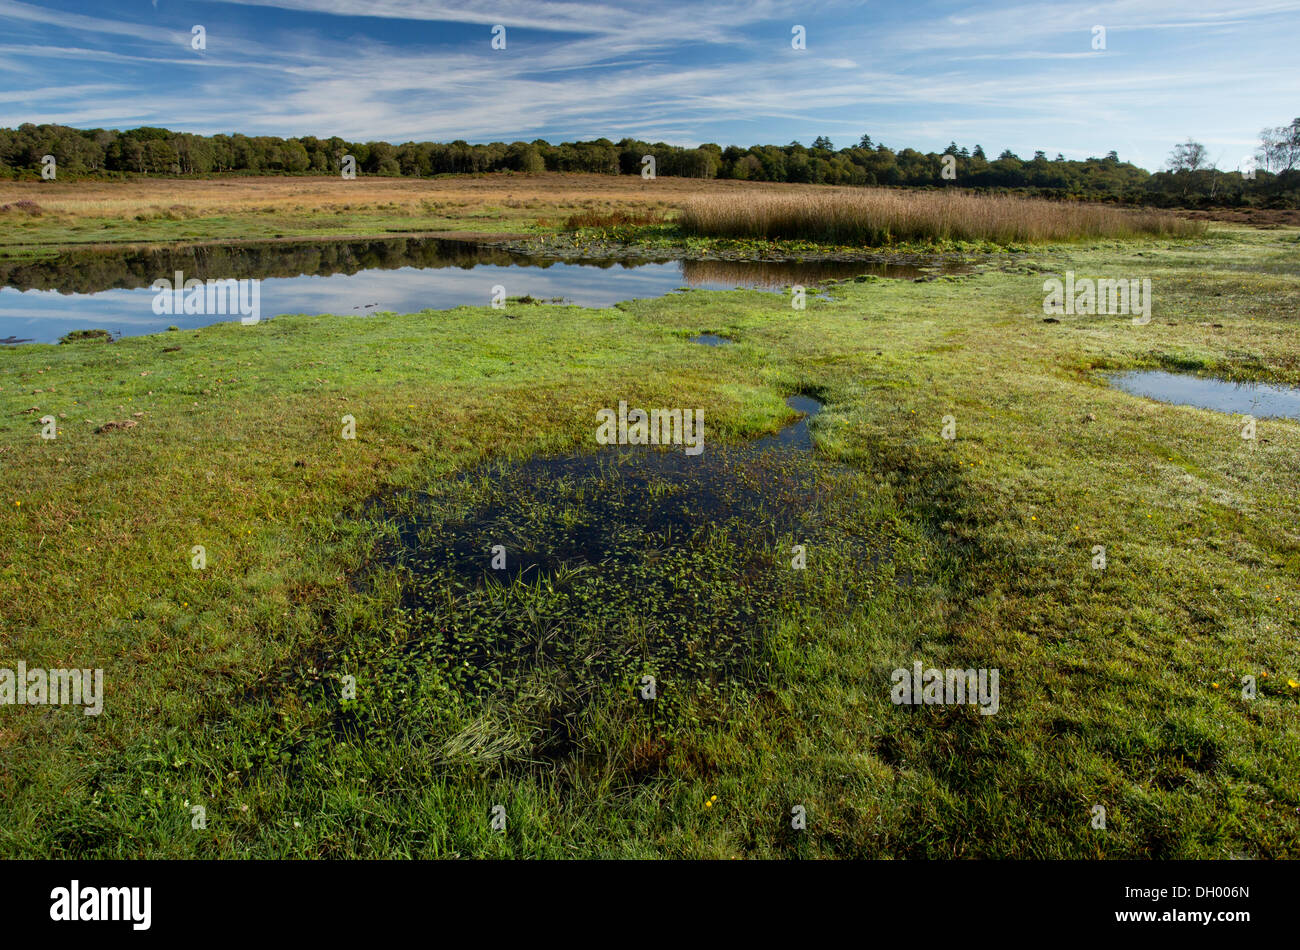 A biodiverse New Forest Pond, Burley Moor East pond, with wet grassland, near Burley, Hants. Stock Photo